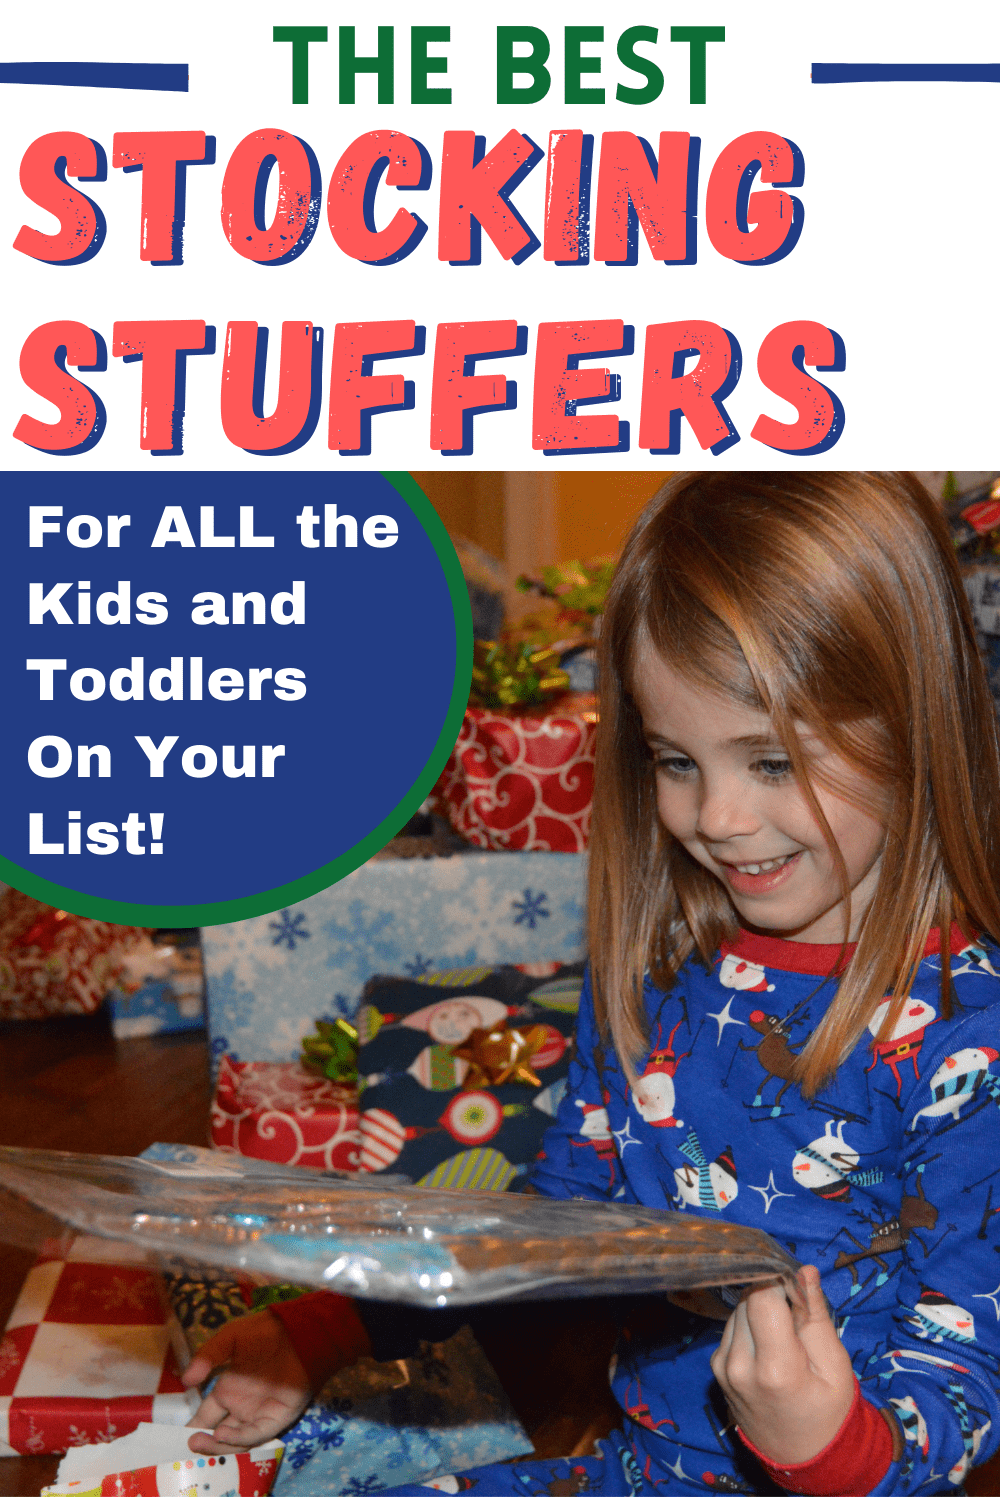 Best Stocking Stuffers and Ideas for Toddlers and Kids —